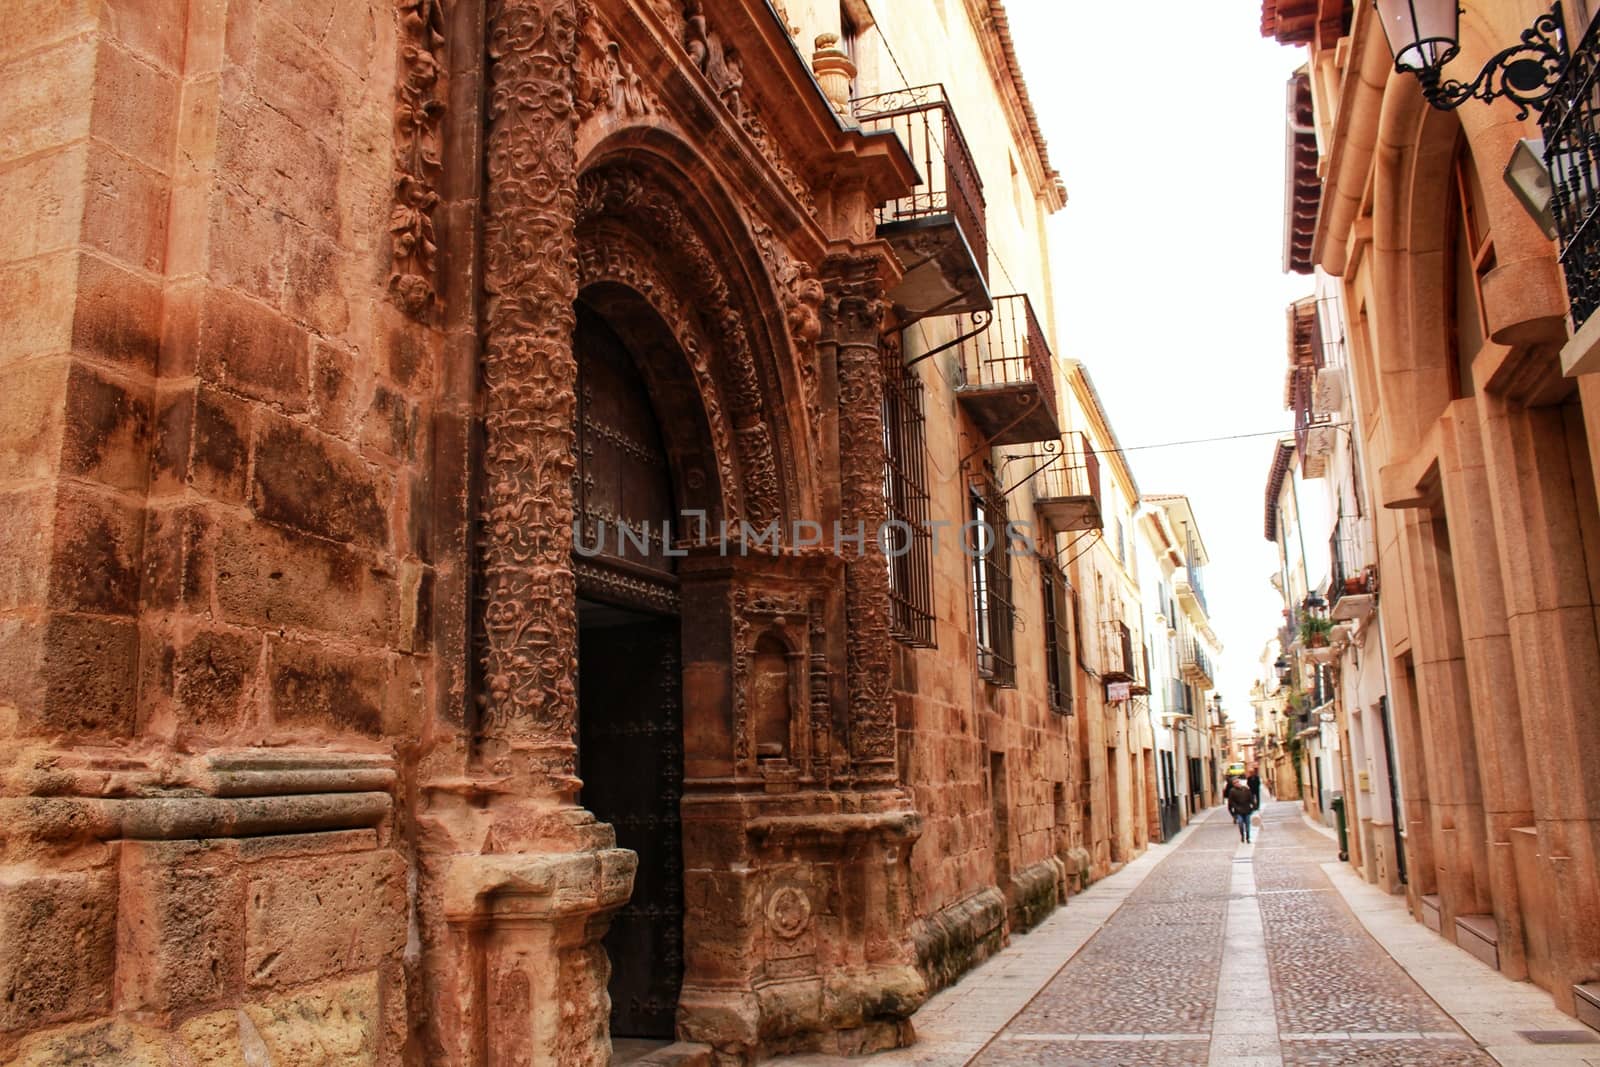 Narrow streets with Renaissance style houses in Alcaraz, Spain by soniabonet